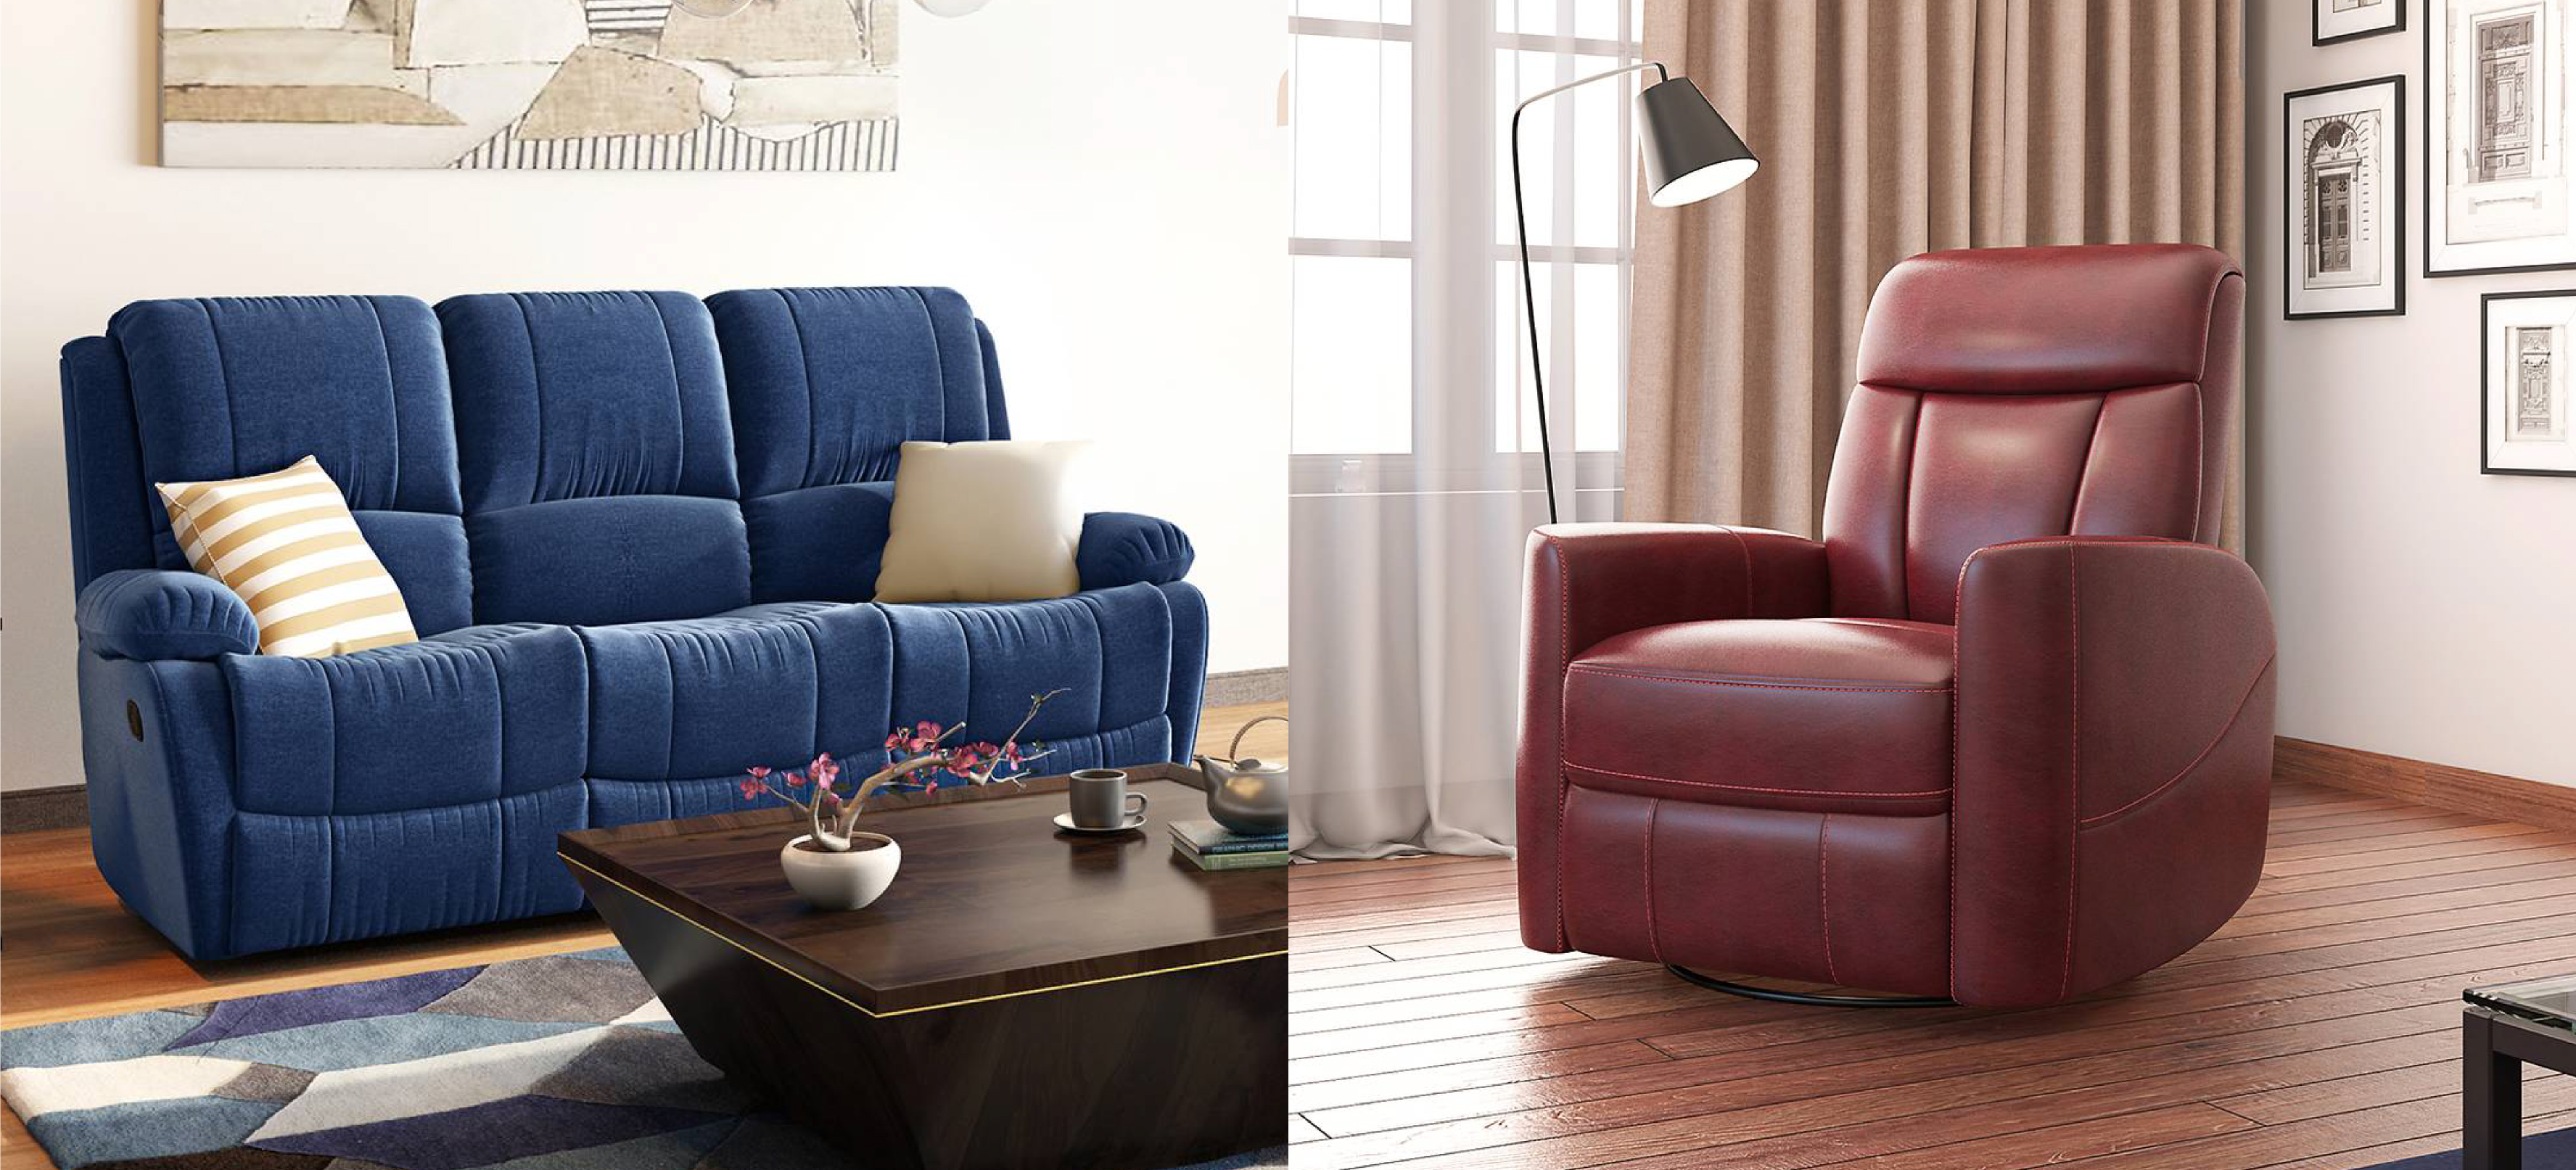 Fabric Vs Leather Recliner Which Is